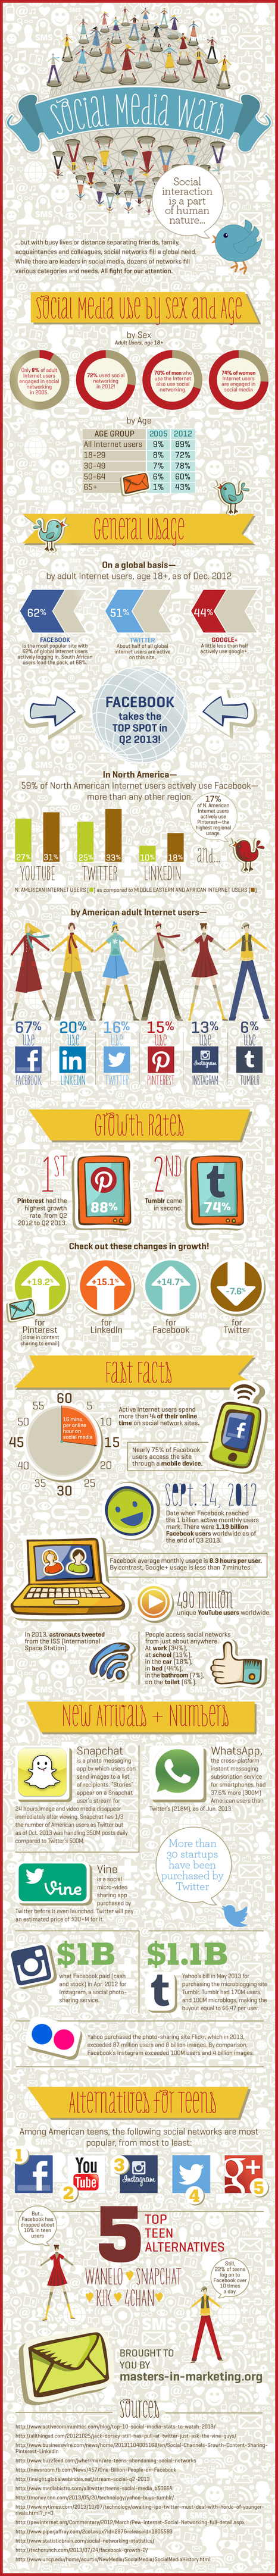 The Social Media Wars [INFOGRAPHIC] | Social marketing - Health Promotion | Scoop.it